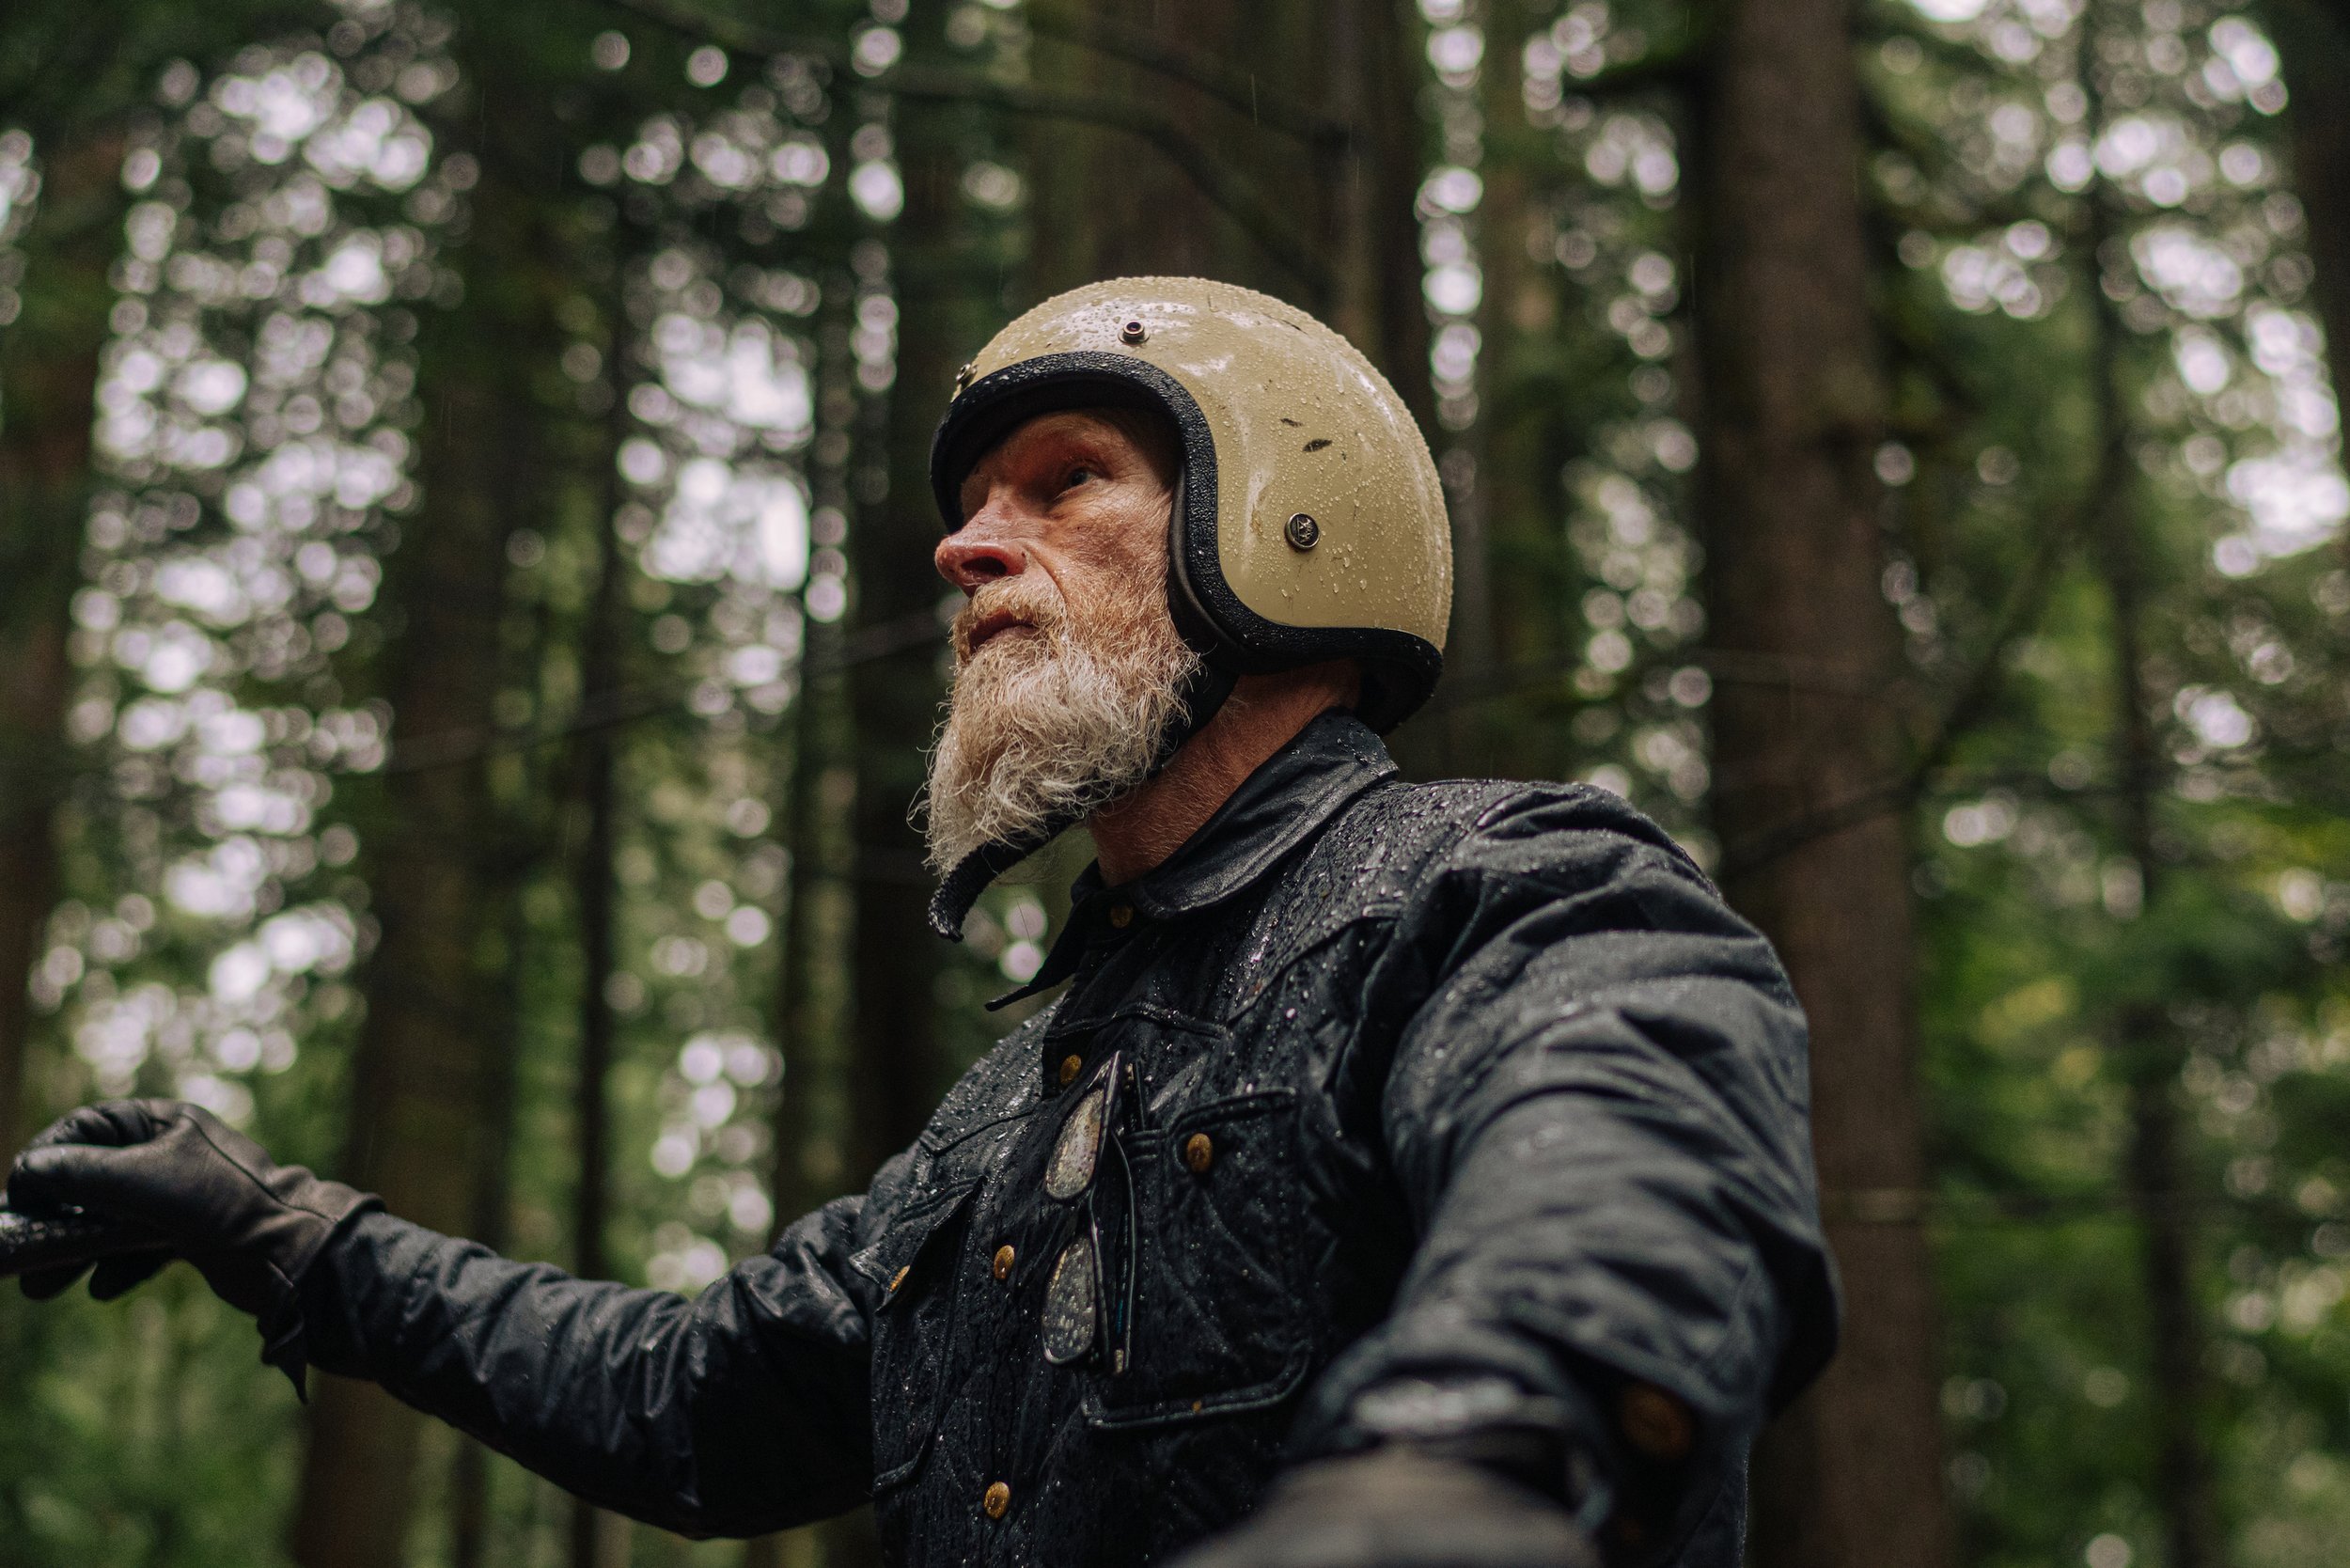 Black Bear Brand BLACK Wax Canvas Embracing the elements in style! 🌲🏍️ This rugged adventurer conquers the Pacific Northwest rainforest on his sleek motorcycle